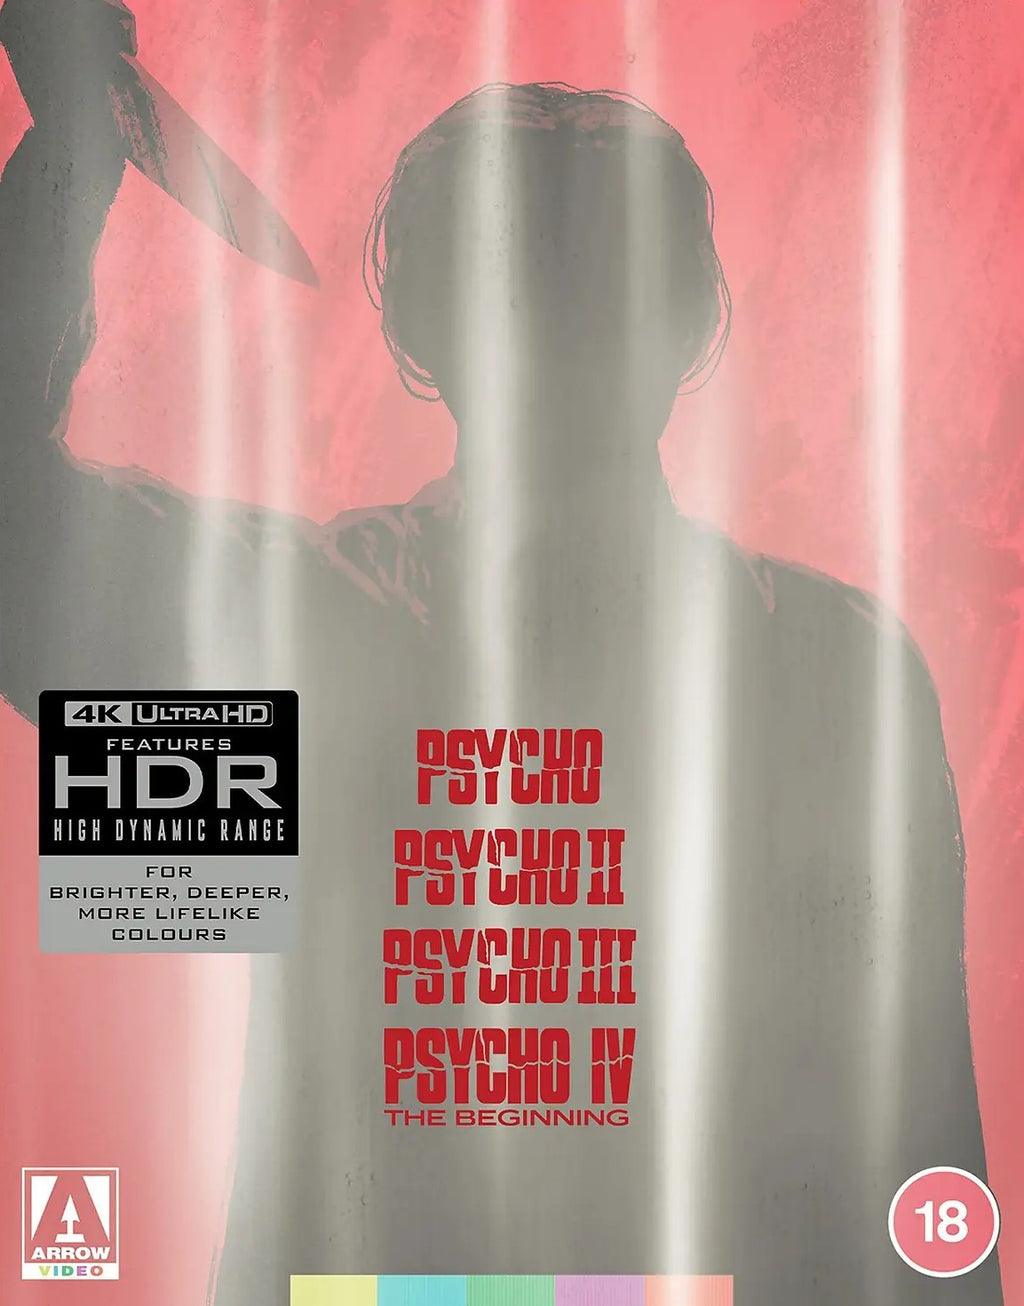 THE　LIMITED　4K　COLLECTION　FREE　PSYCHO　EDITION)　UHD　(REGION　IMPORT